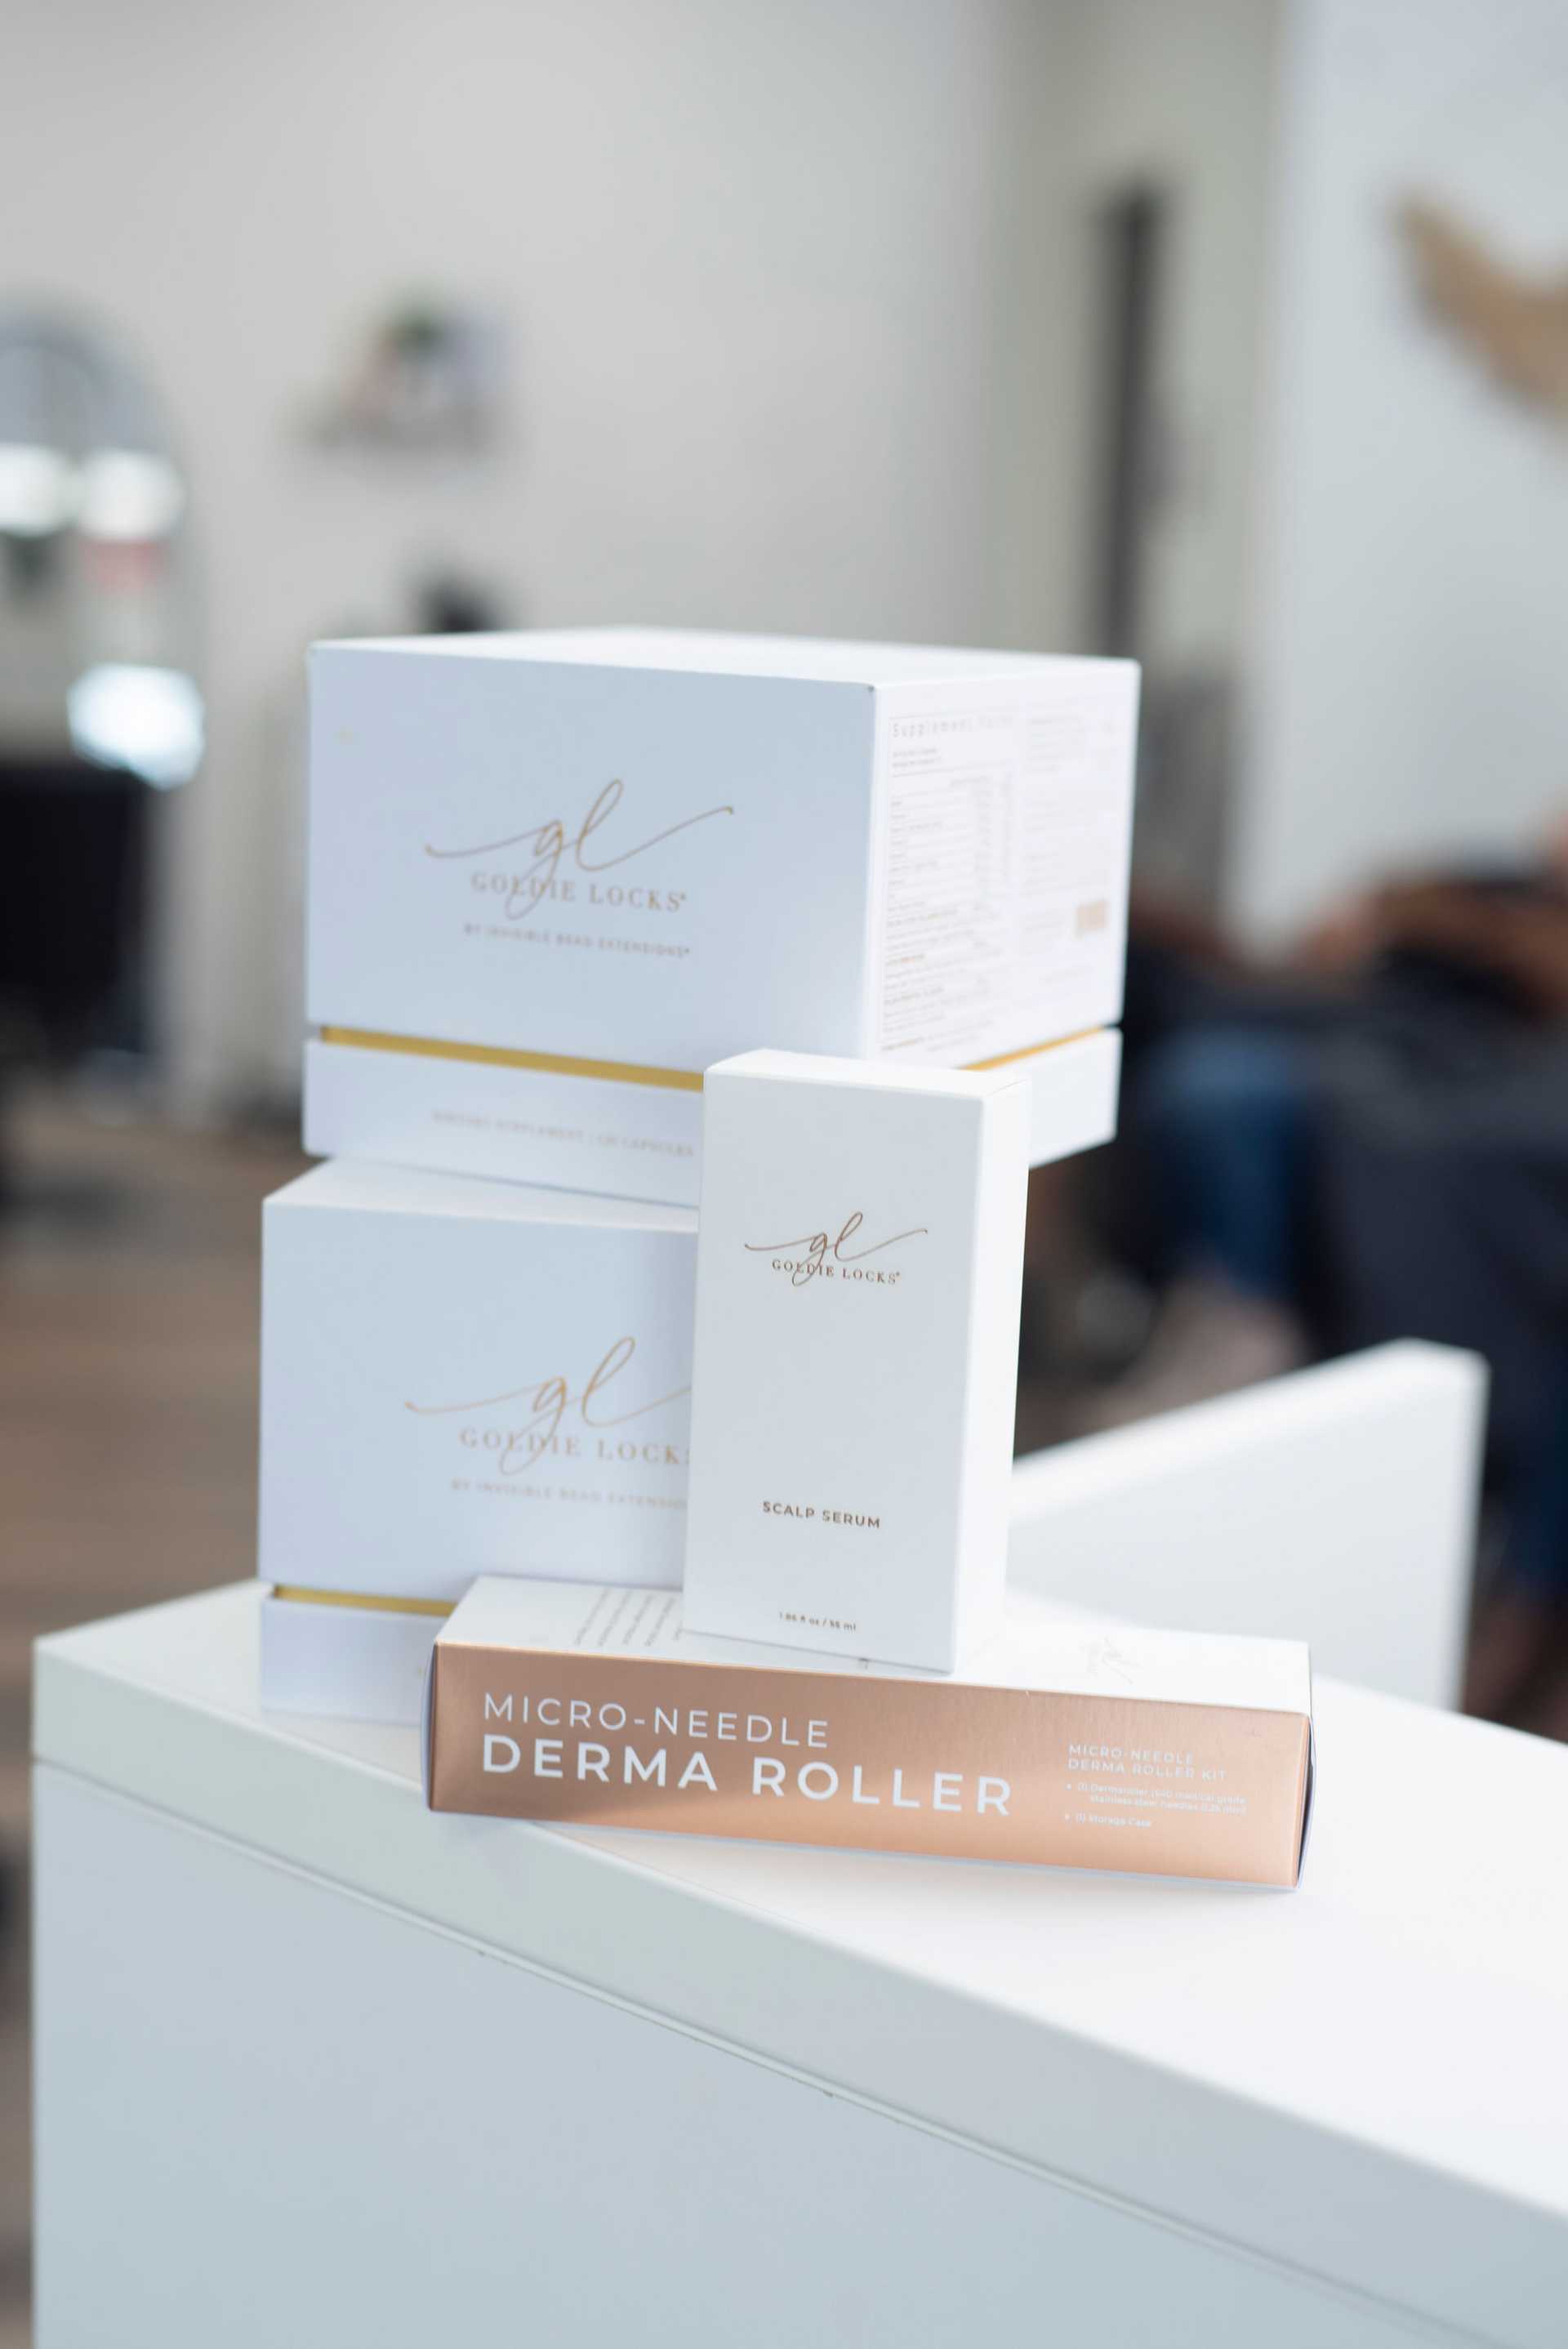 Boxes of beauty products with brand 'Goldie Locks' on a table.